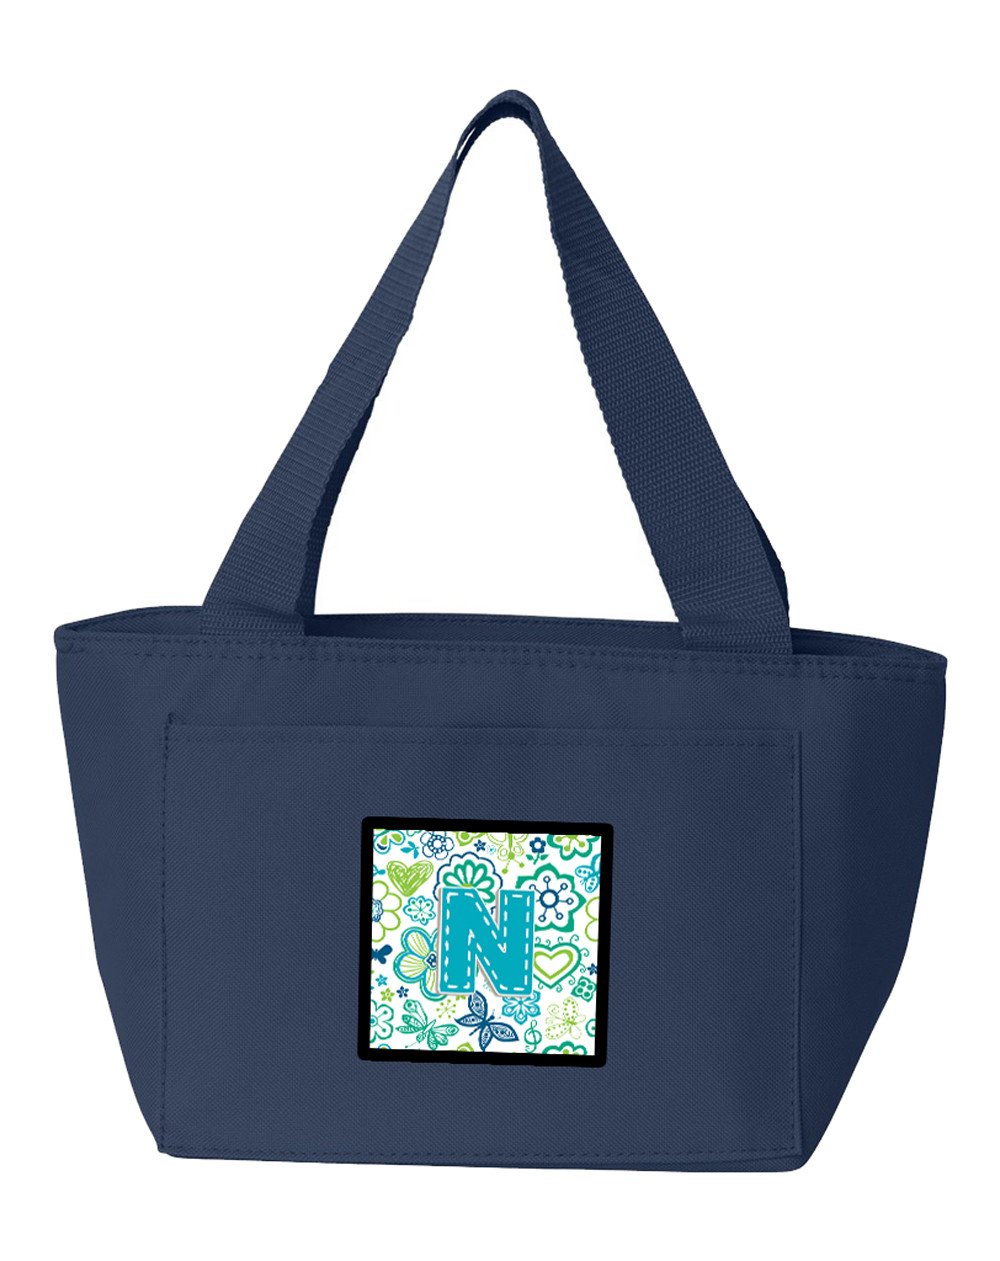 Letter N Flowers and Butterflies Teal Blue Lunch Bag CJ2006-NNA-8808 by Caroline's Treasures